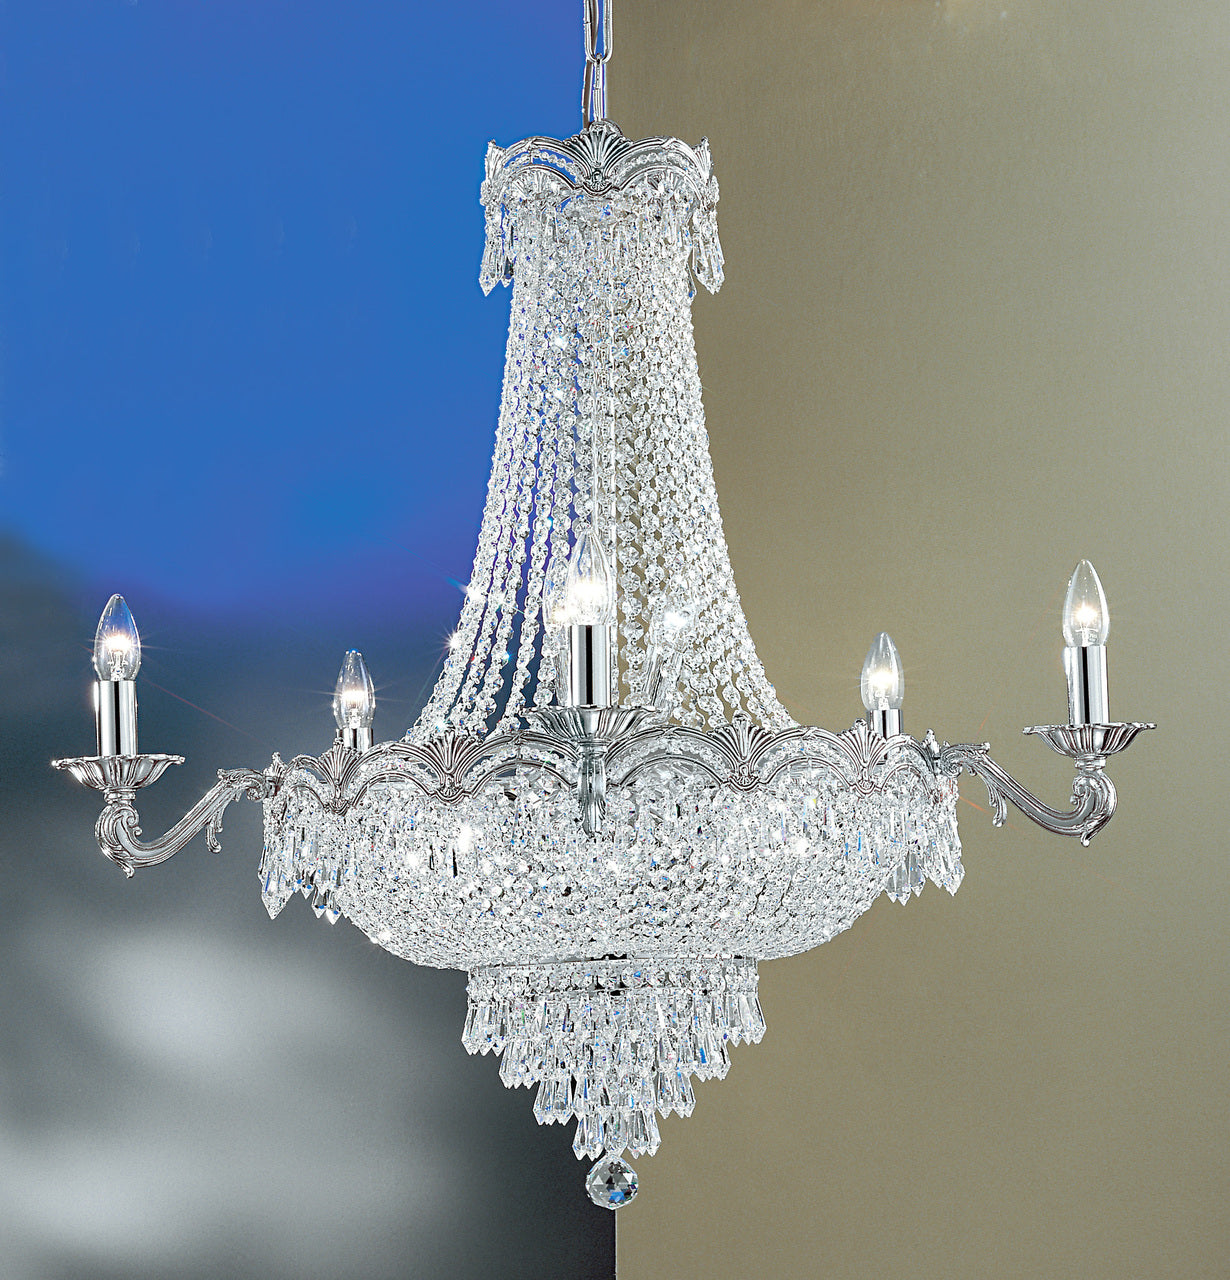 Classic Lighting 1859 CHB SC Regency II Crystal Chandelier in Chrome/Black Patina (Imported from Spain)